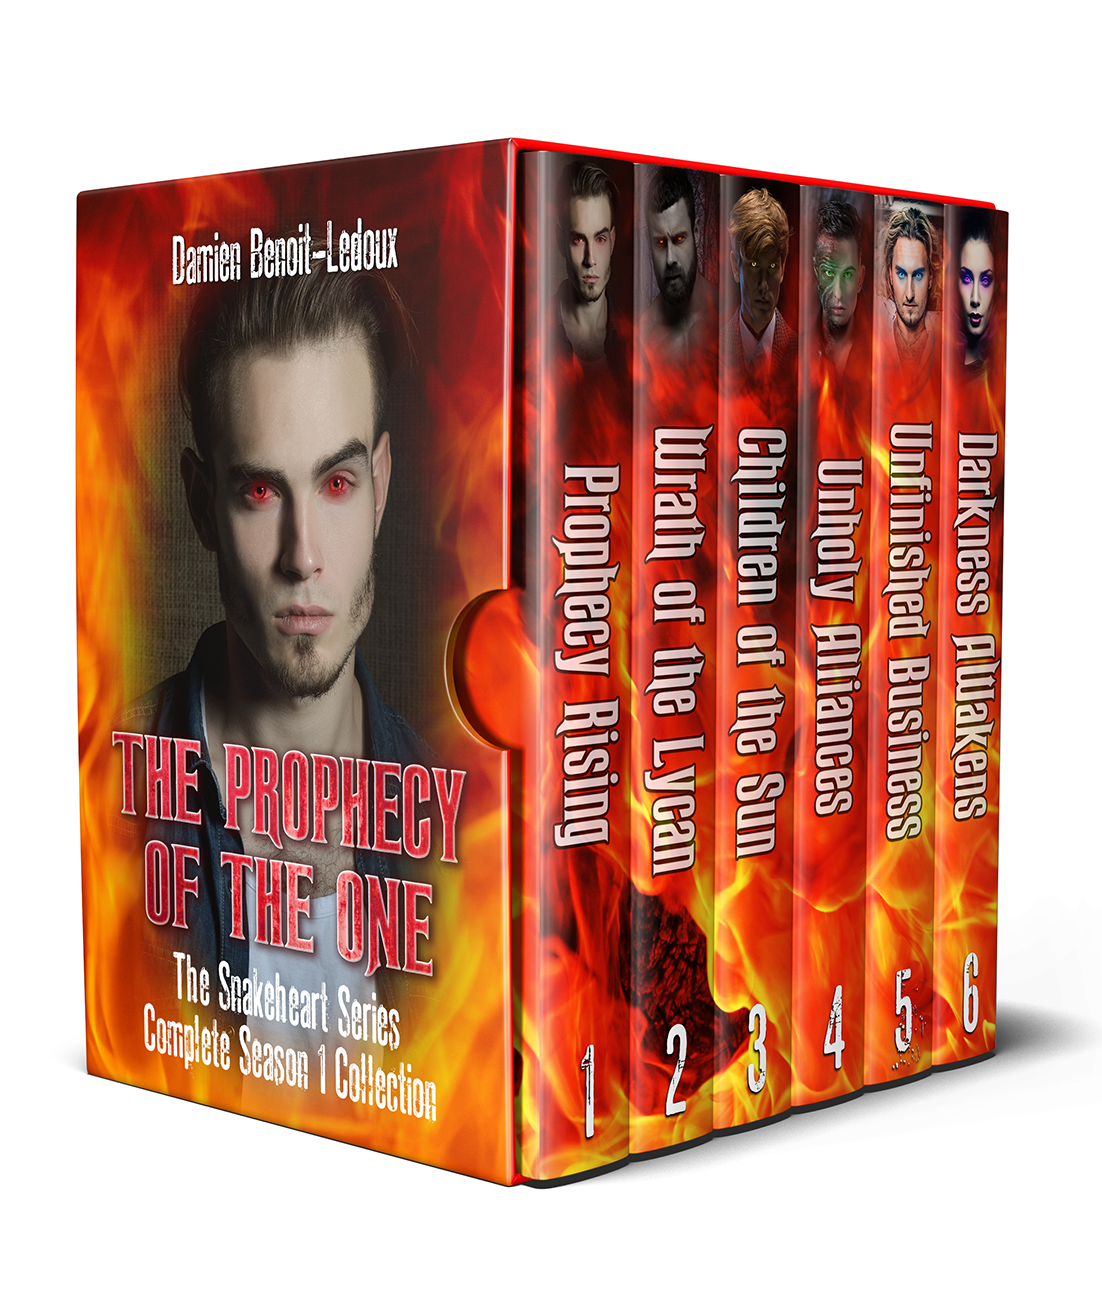 The Prophecy of The One (Season 1 Box Set) (paperback)